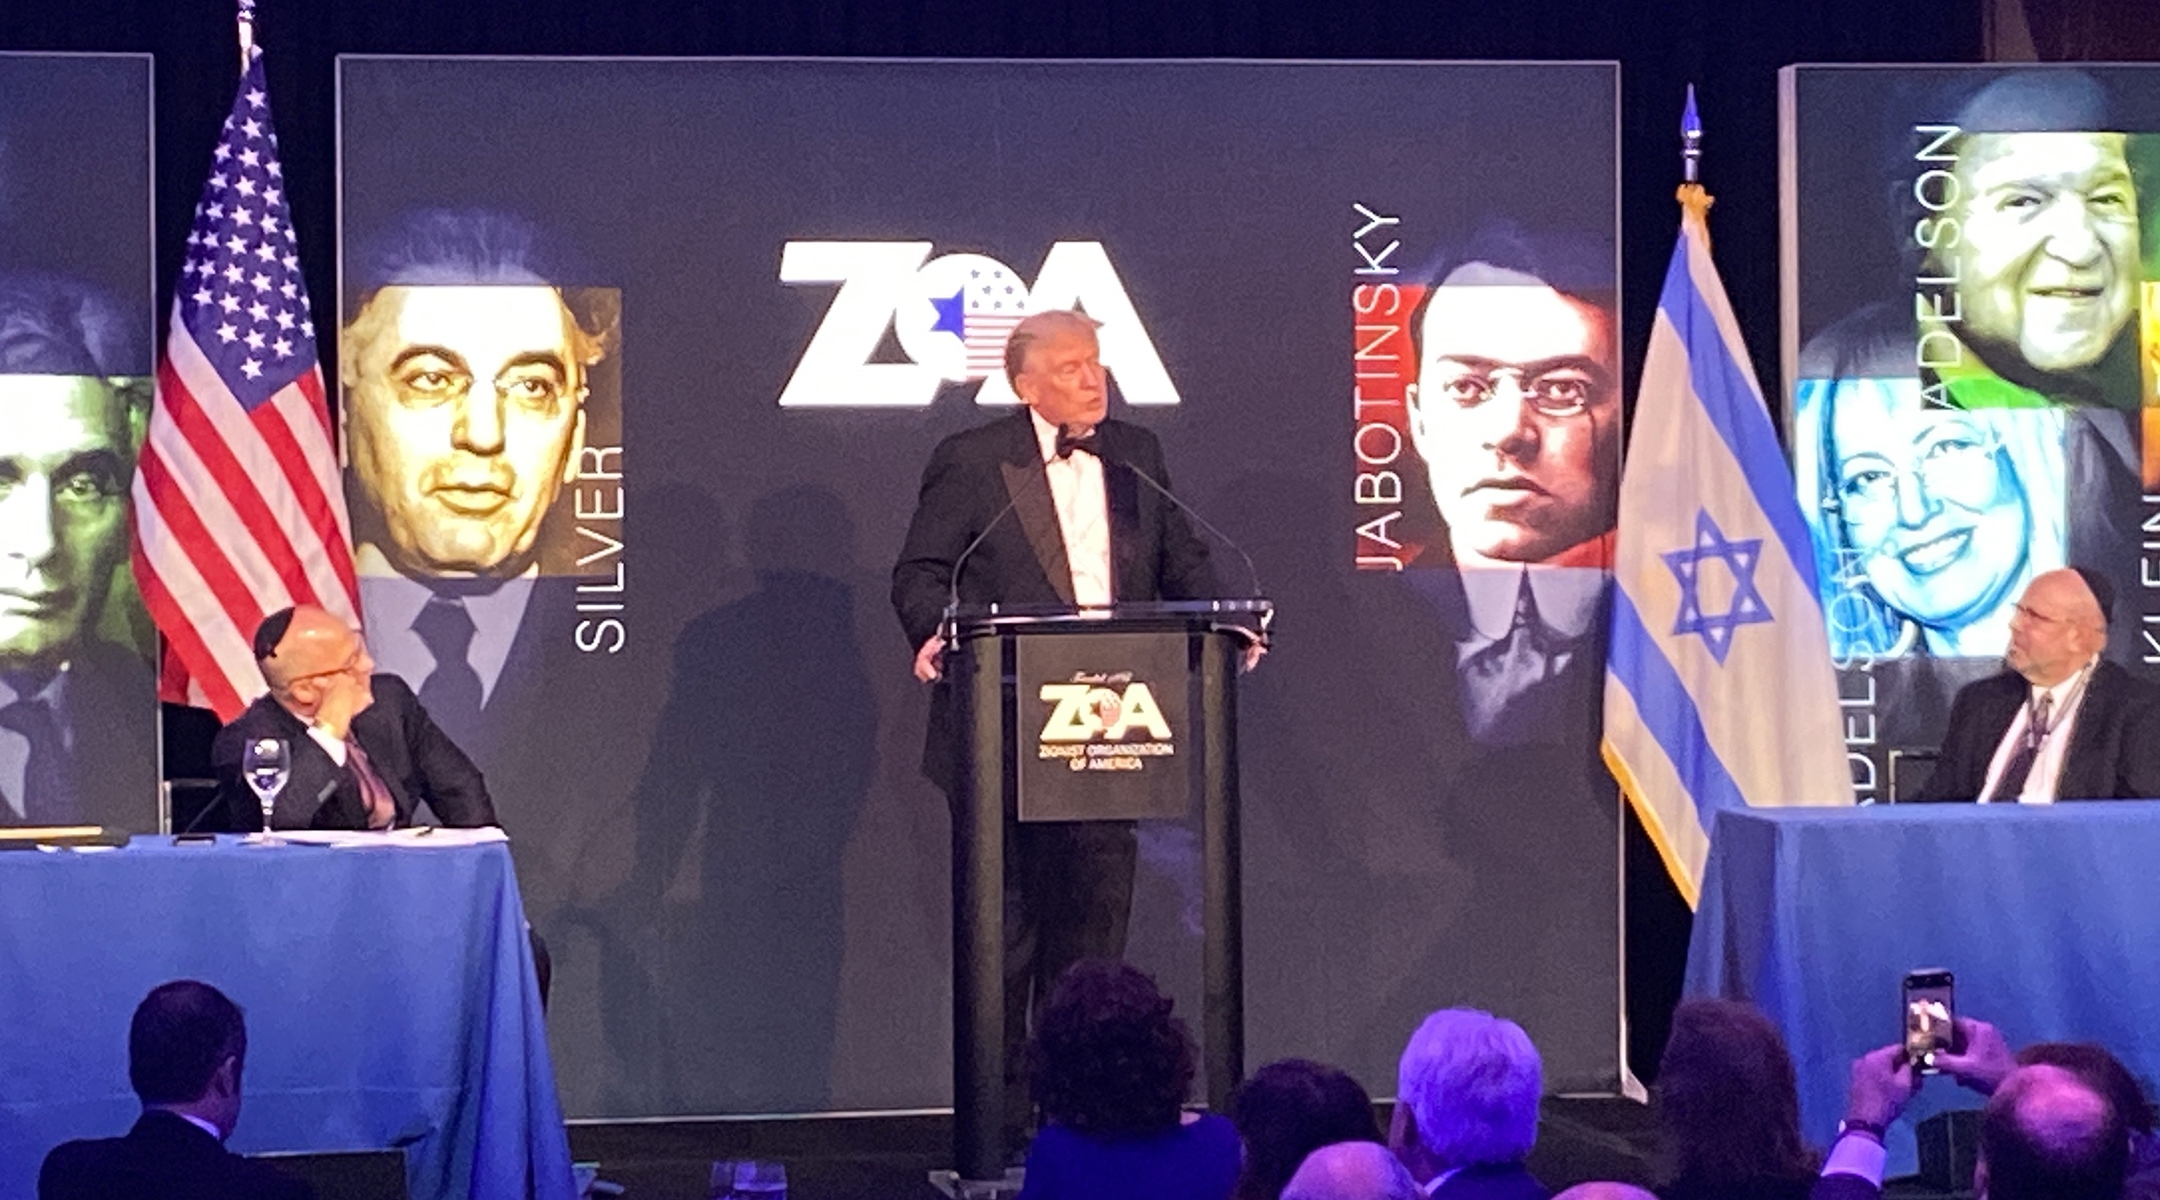 Former President Donald Trump spoke at the Zionist Organization of America gala on Sunday at Chelsea Piers in New York City.